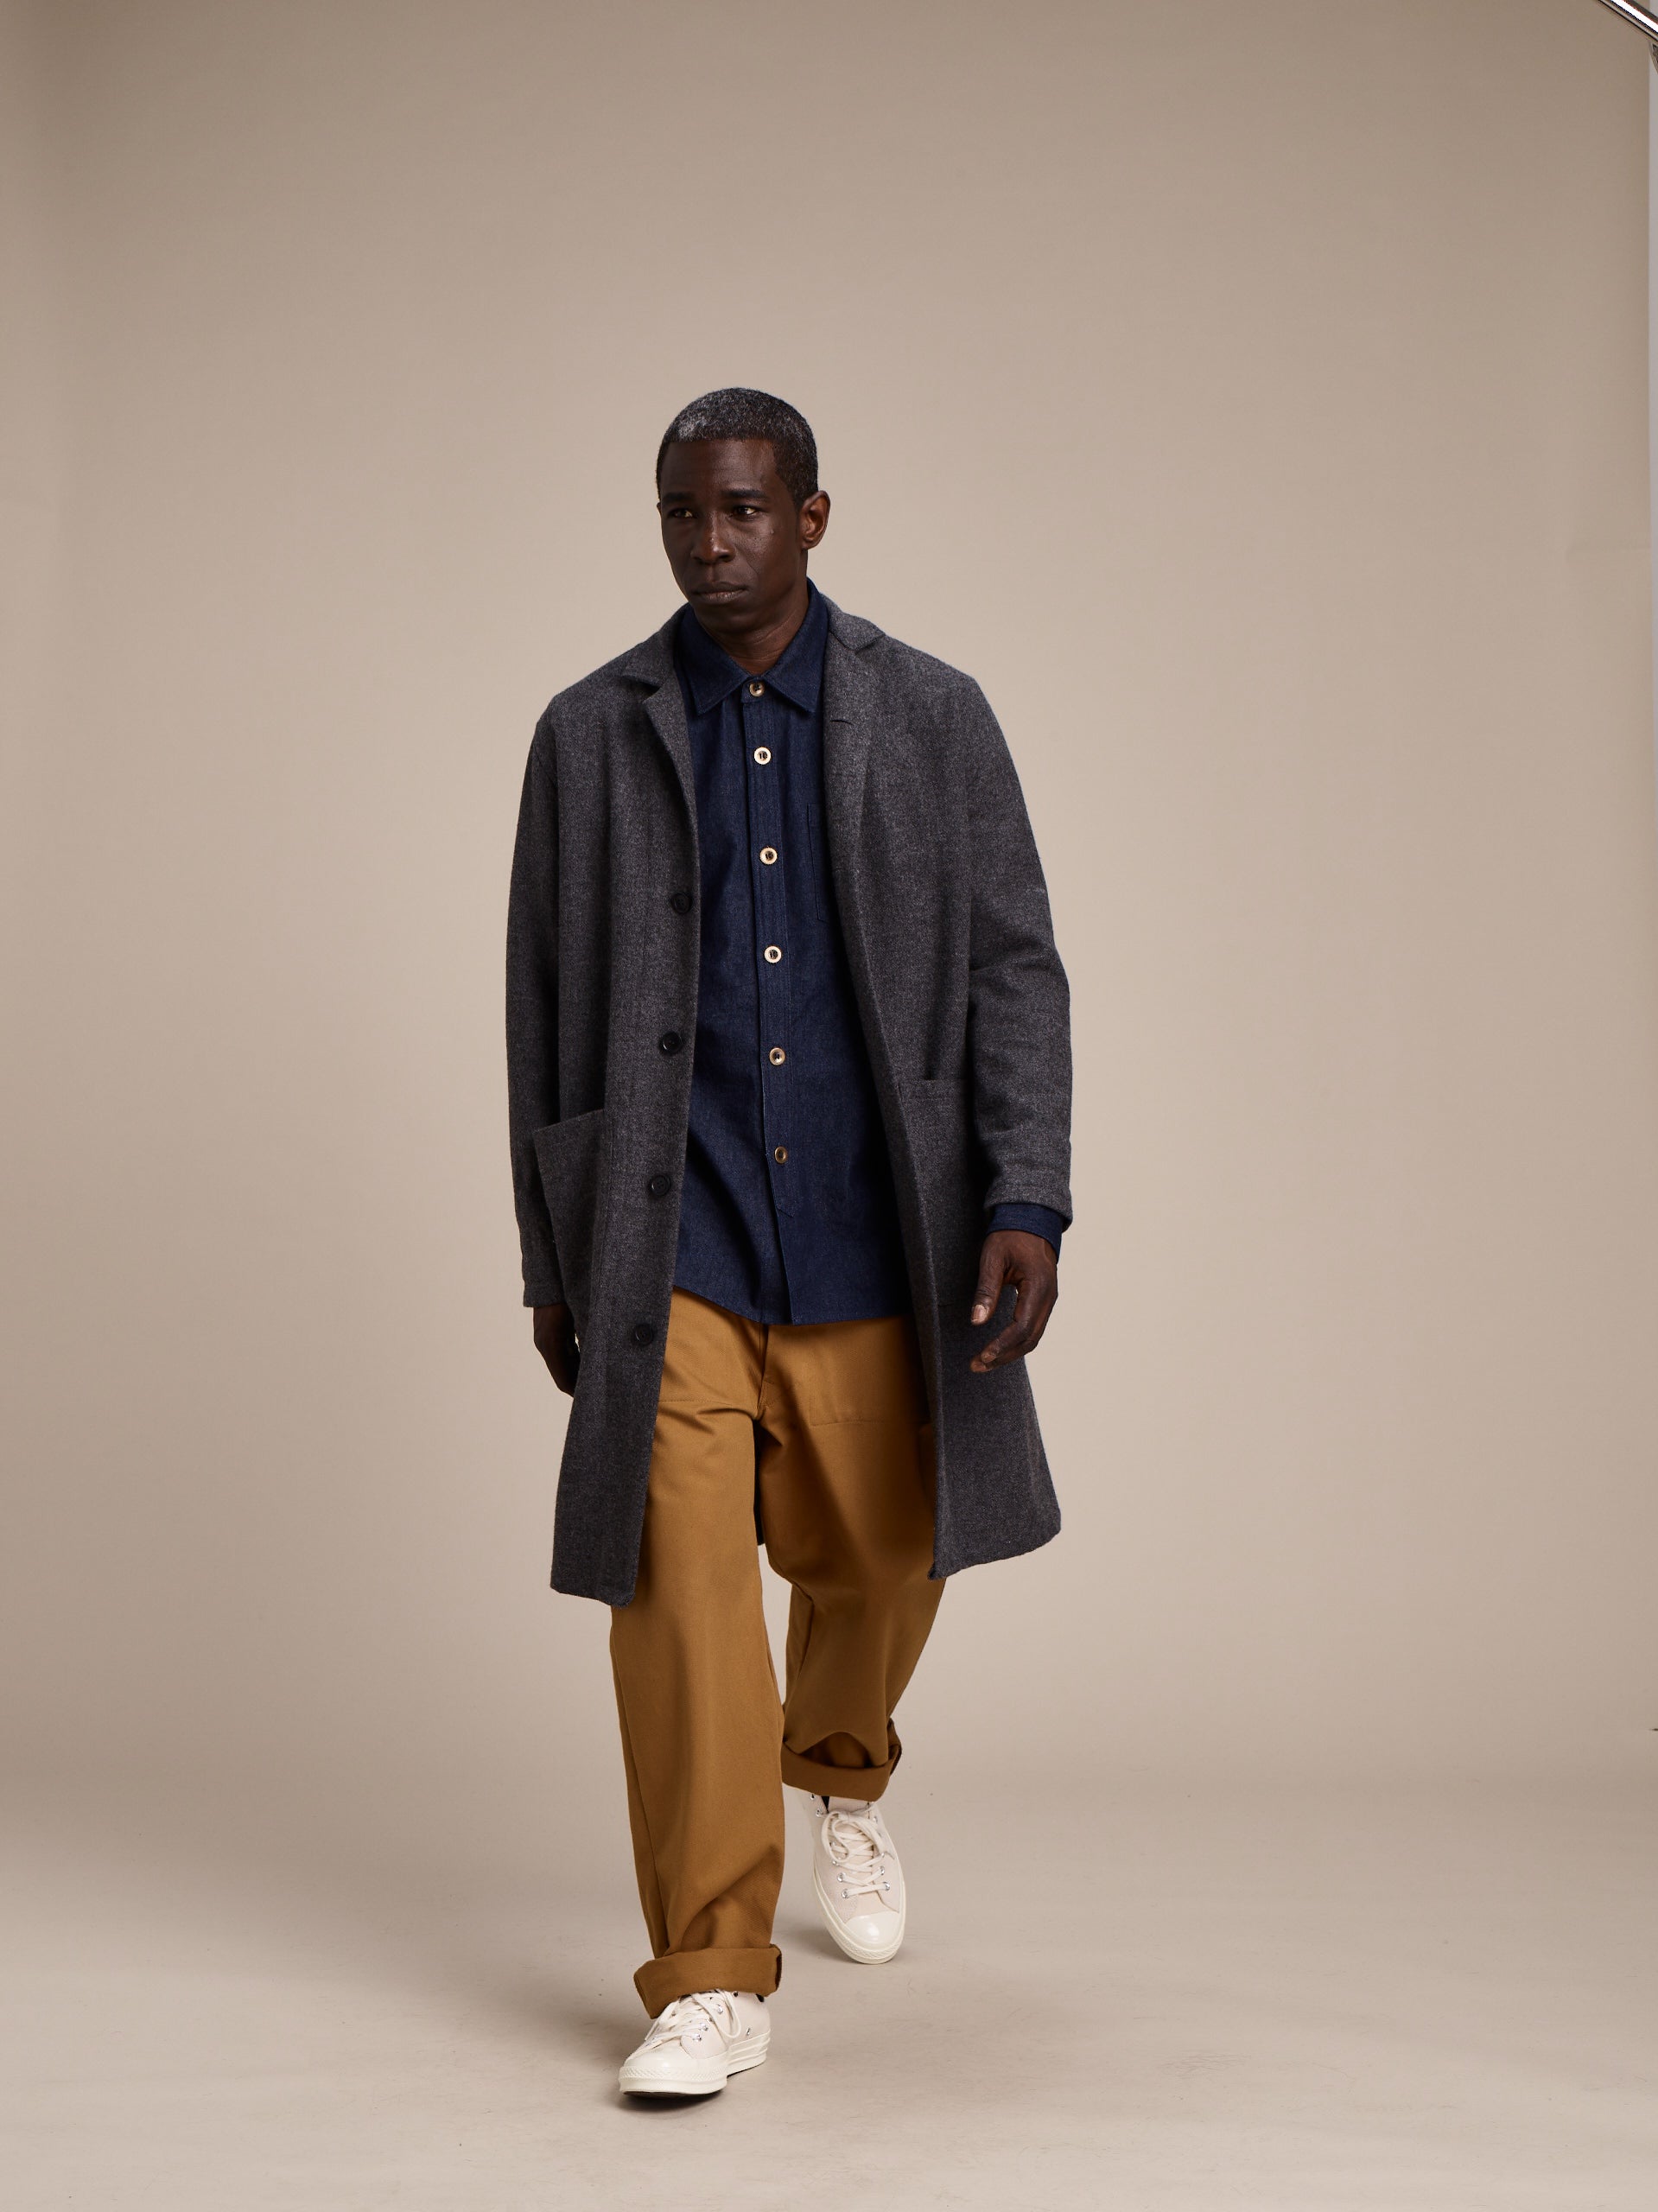 Man wearing Carrier Company Men's Work Trouser in Tan Drill with Grey Wool Coat and Denim Collar Shirt